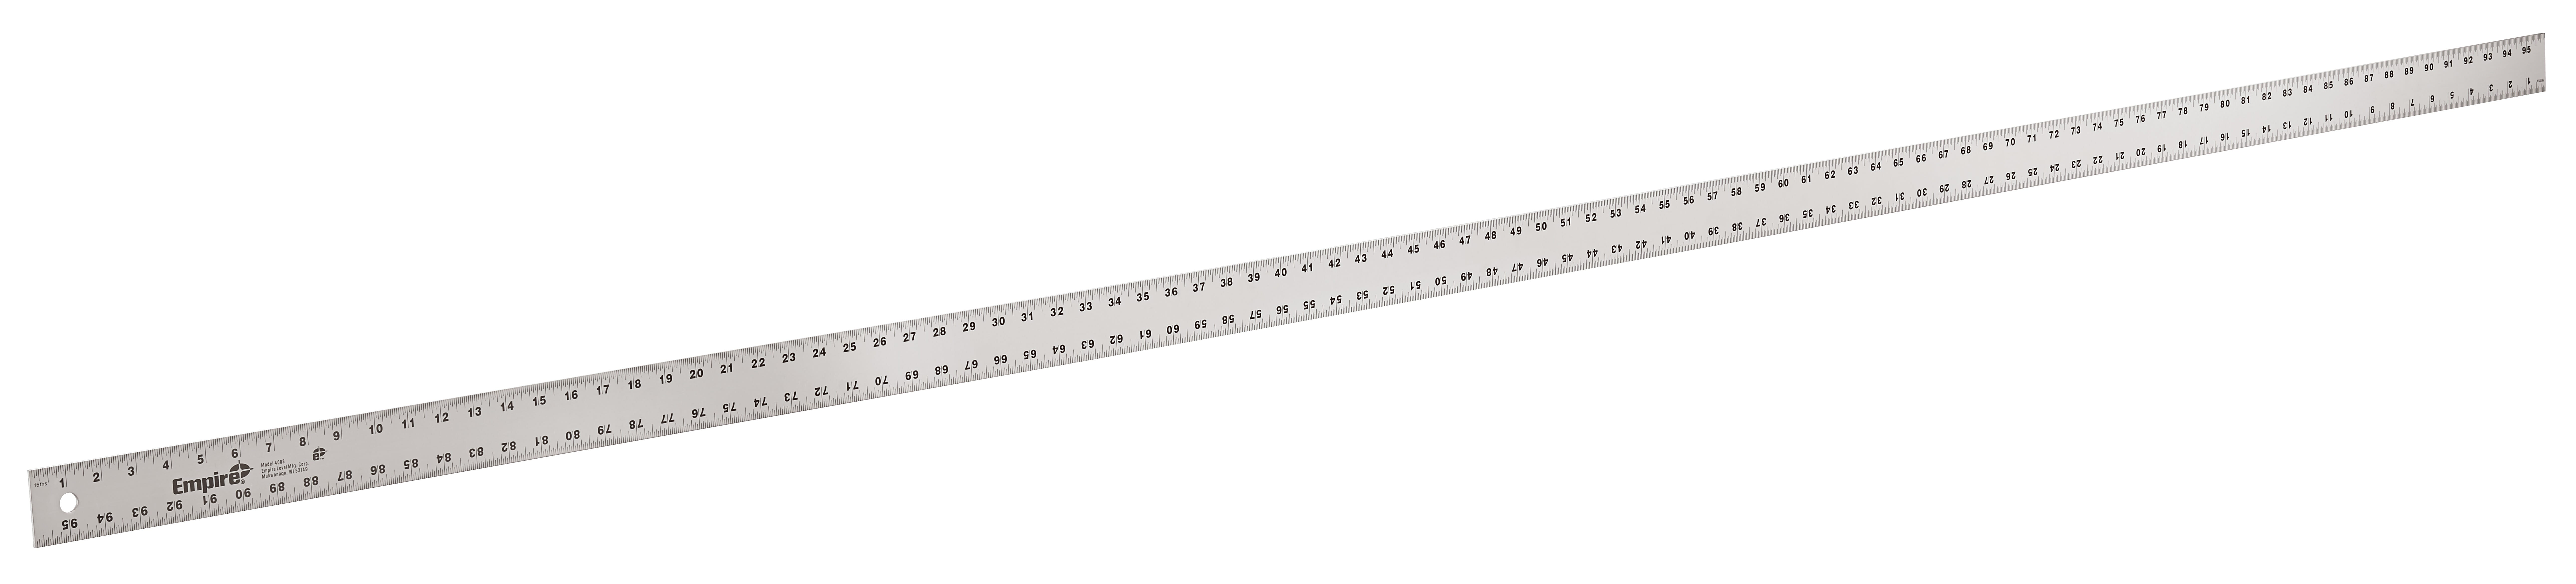 Milwaukee® Empire® 4008 Heavy Duty Straight Edge Ruler, Imperial Measuring System, Graduations 1/16 in, Aluminum